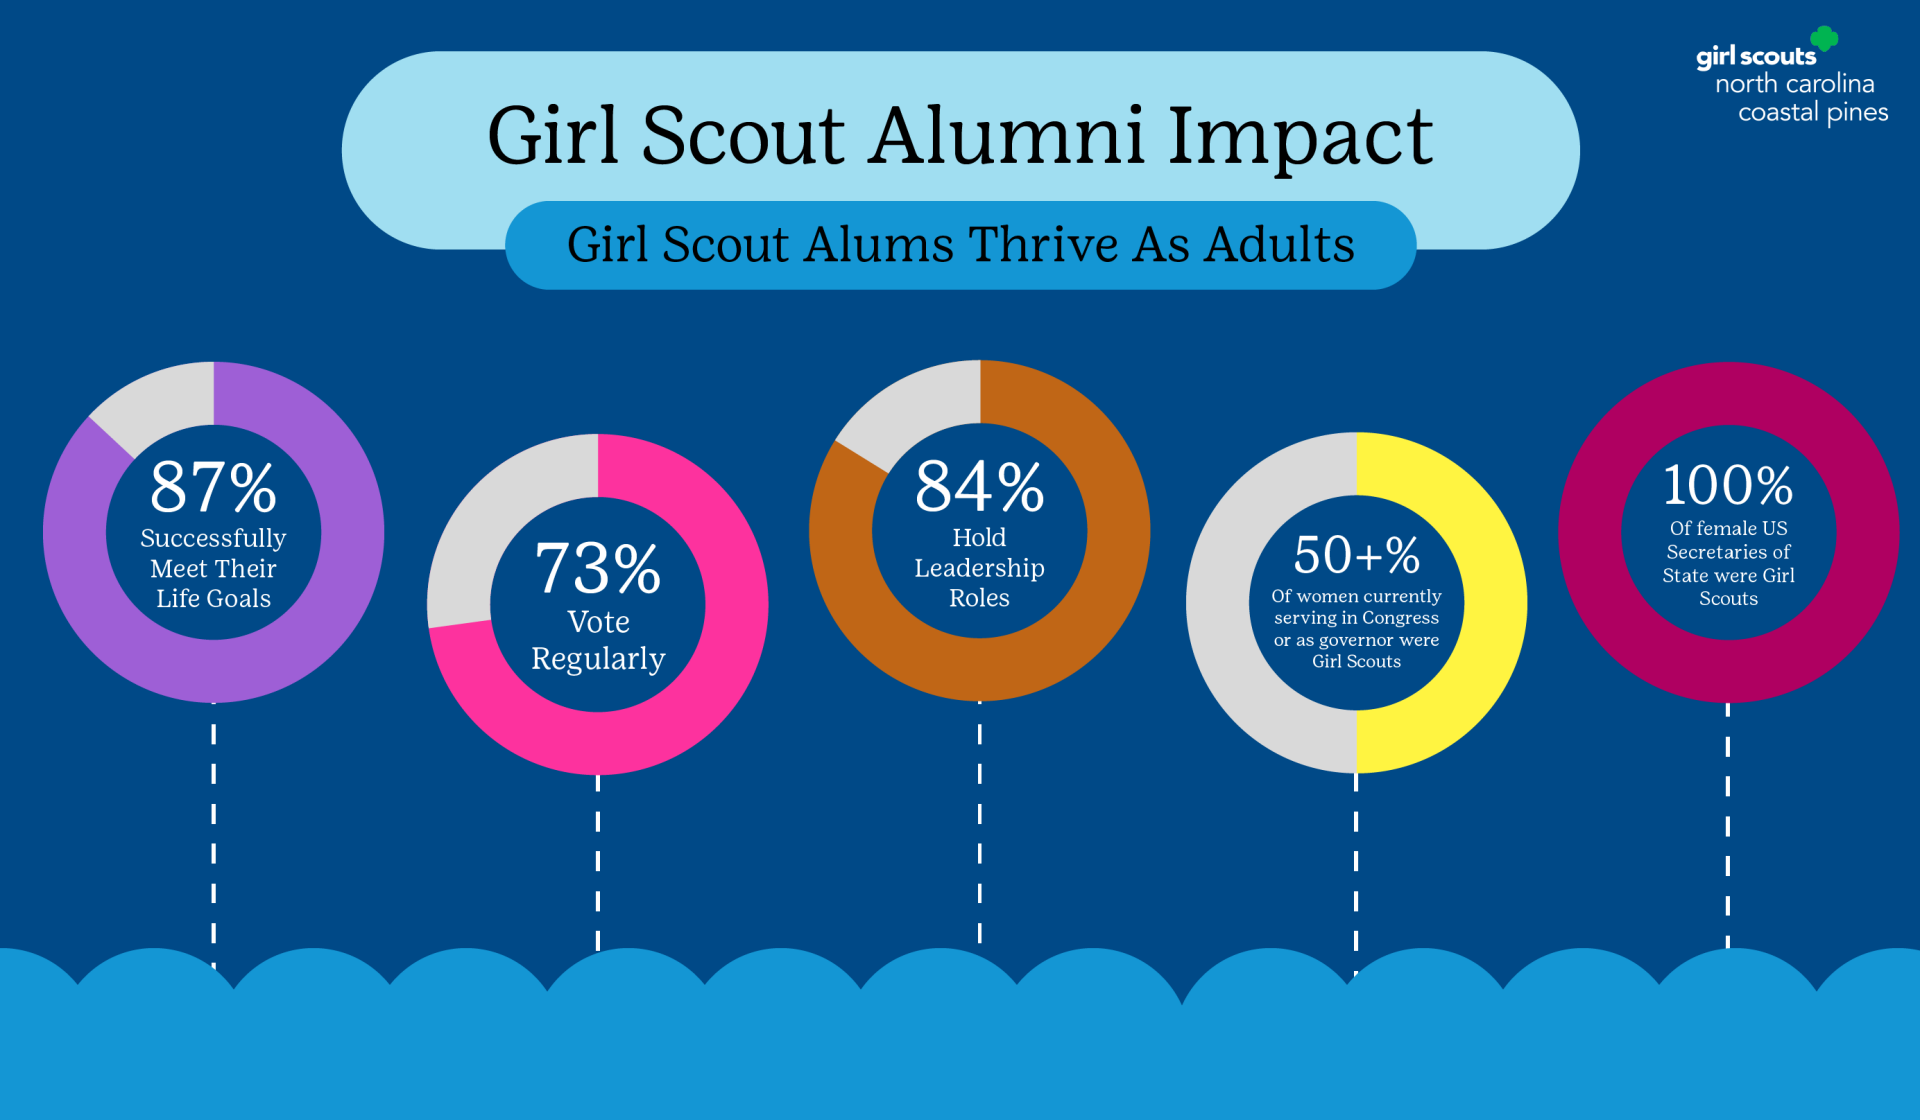 Girl Scout Alumni Impact - 87% successfully met their life goals, 73% vote regularly, 84% hold leadership roles, 50+% of women currently serving in Congress or as governor were Girl Scouts, and 100% of female US Secretaries of State were Girl Scouts